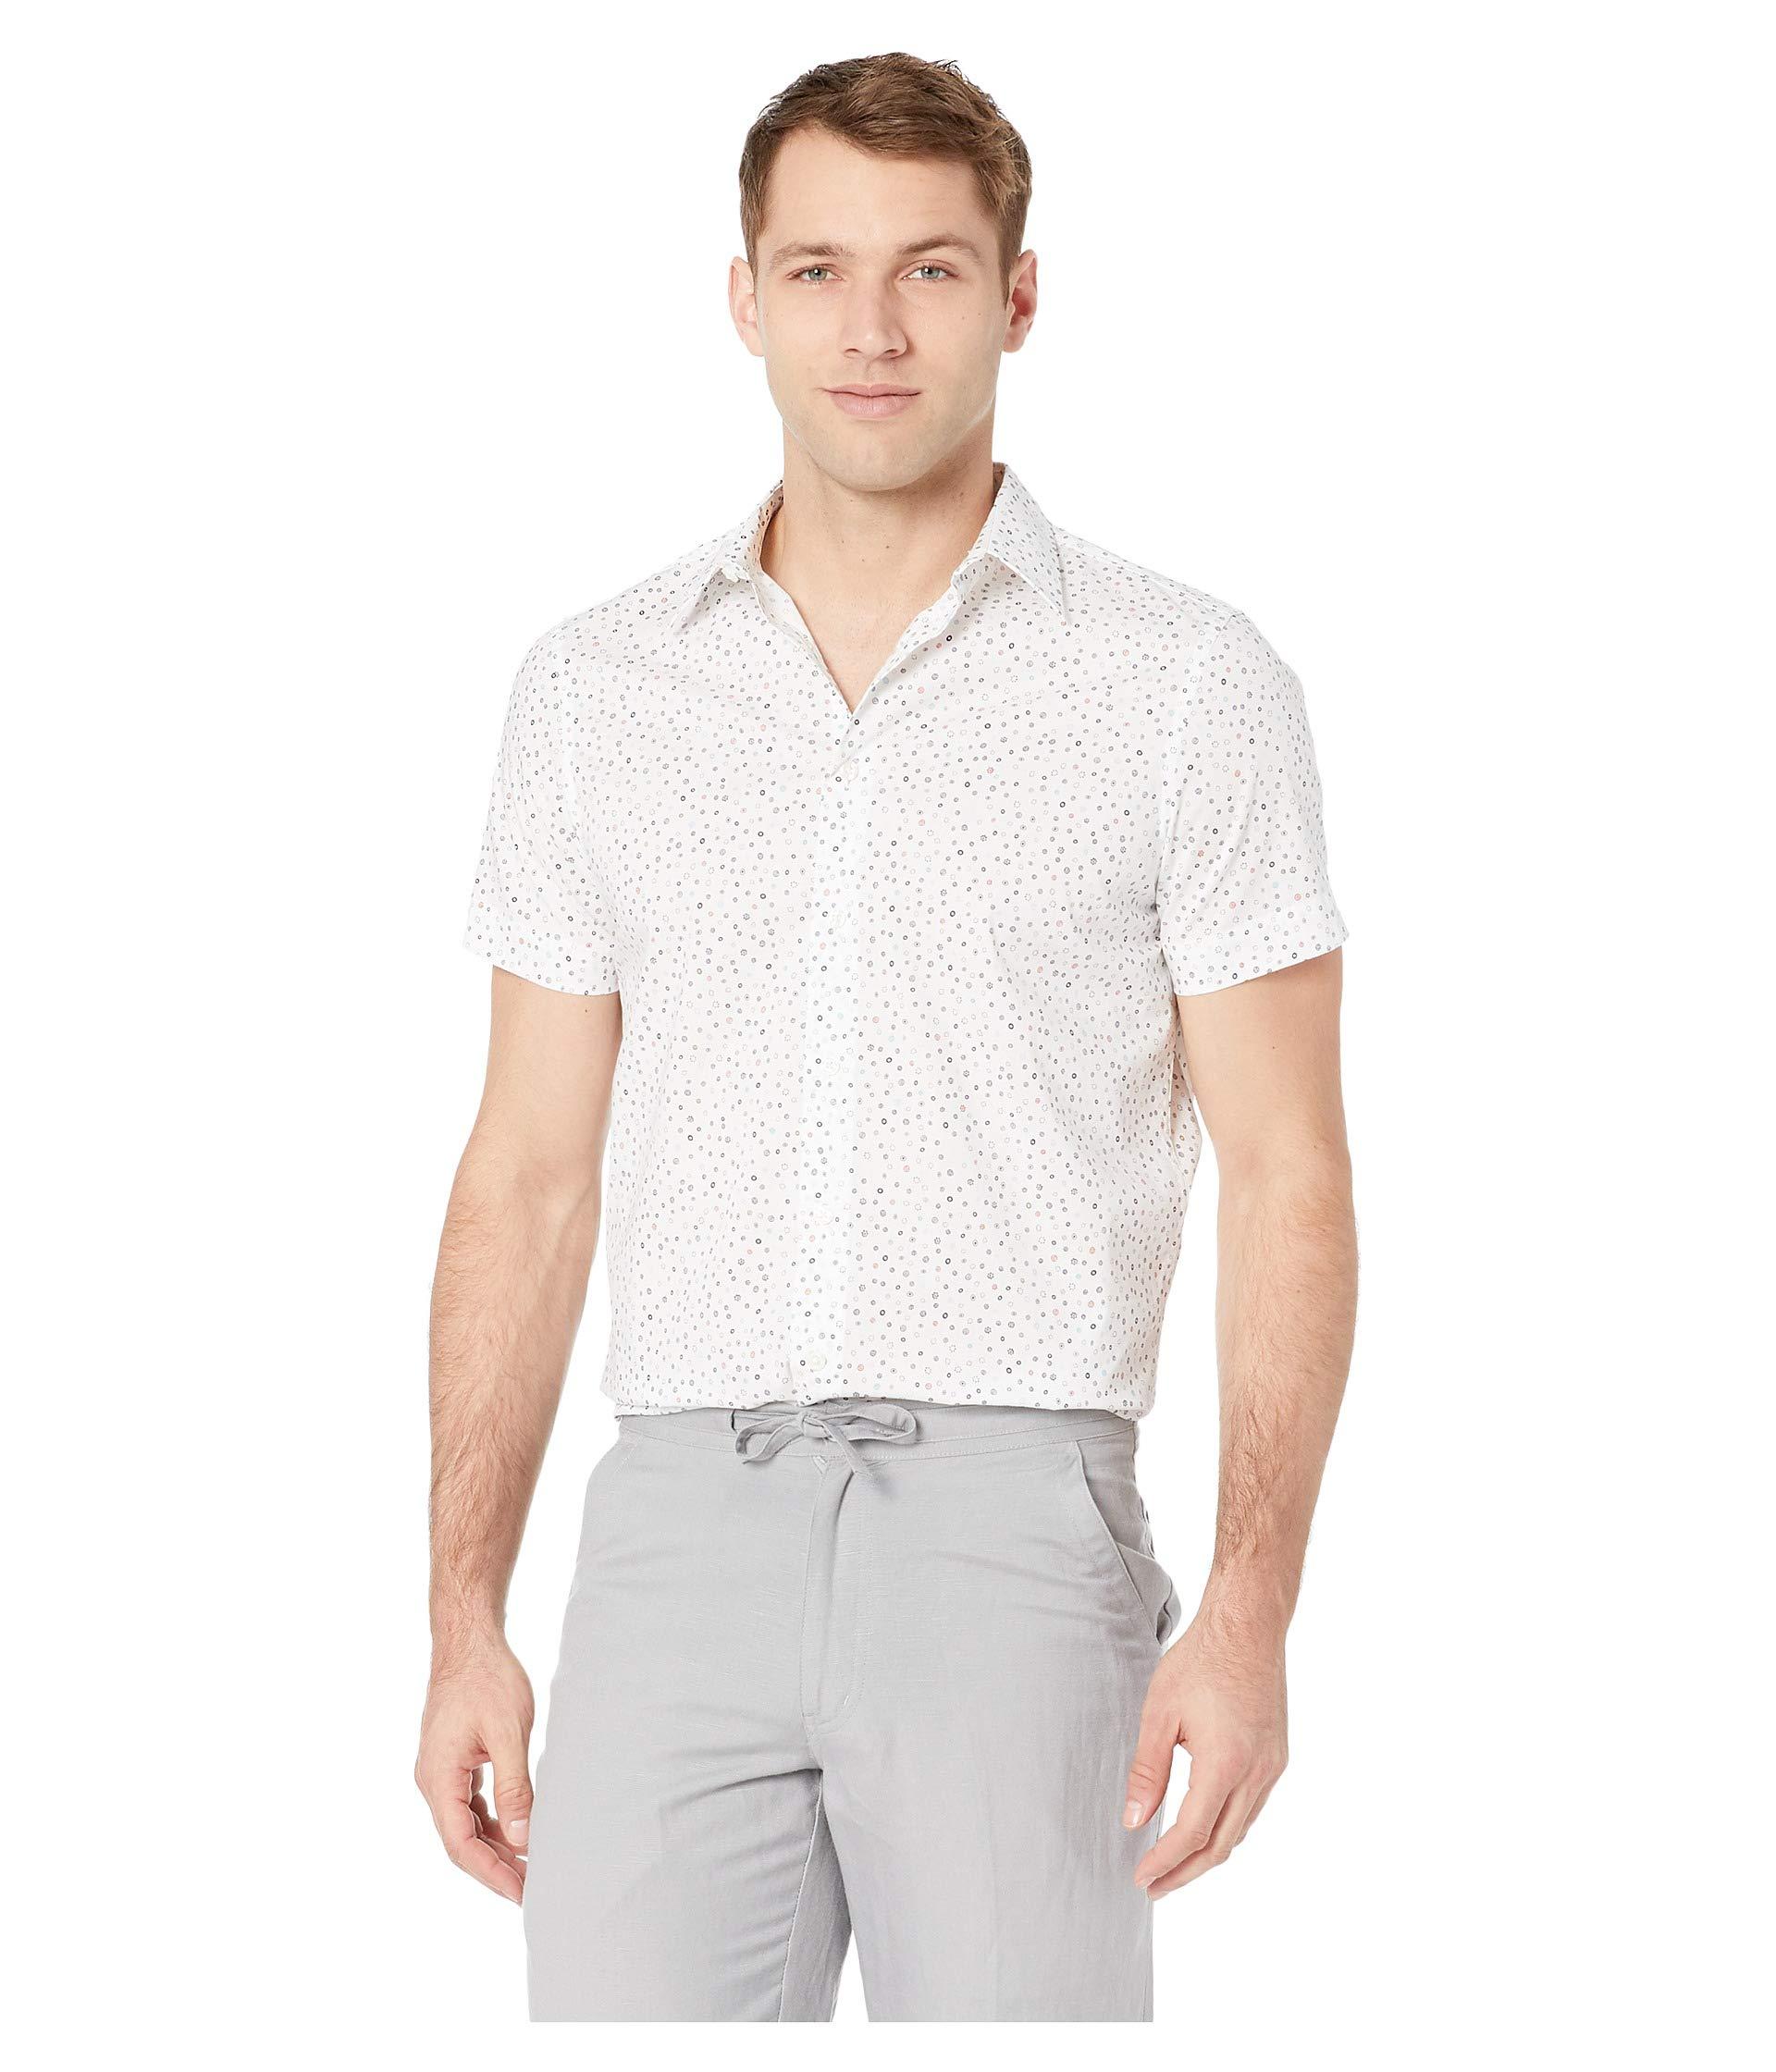 Lyst - Perry Ellis Stretch Geo Print Shirt in White for Men